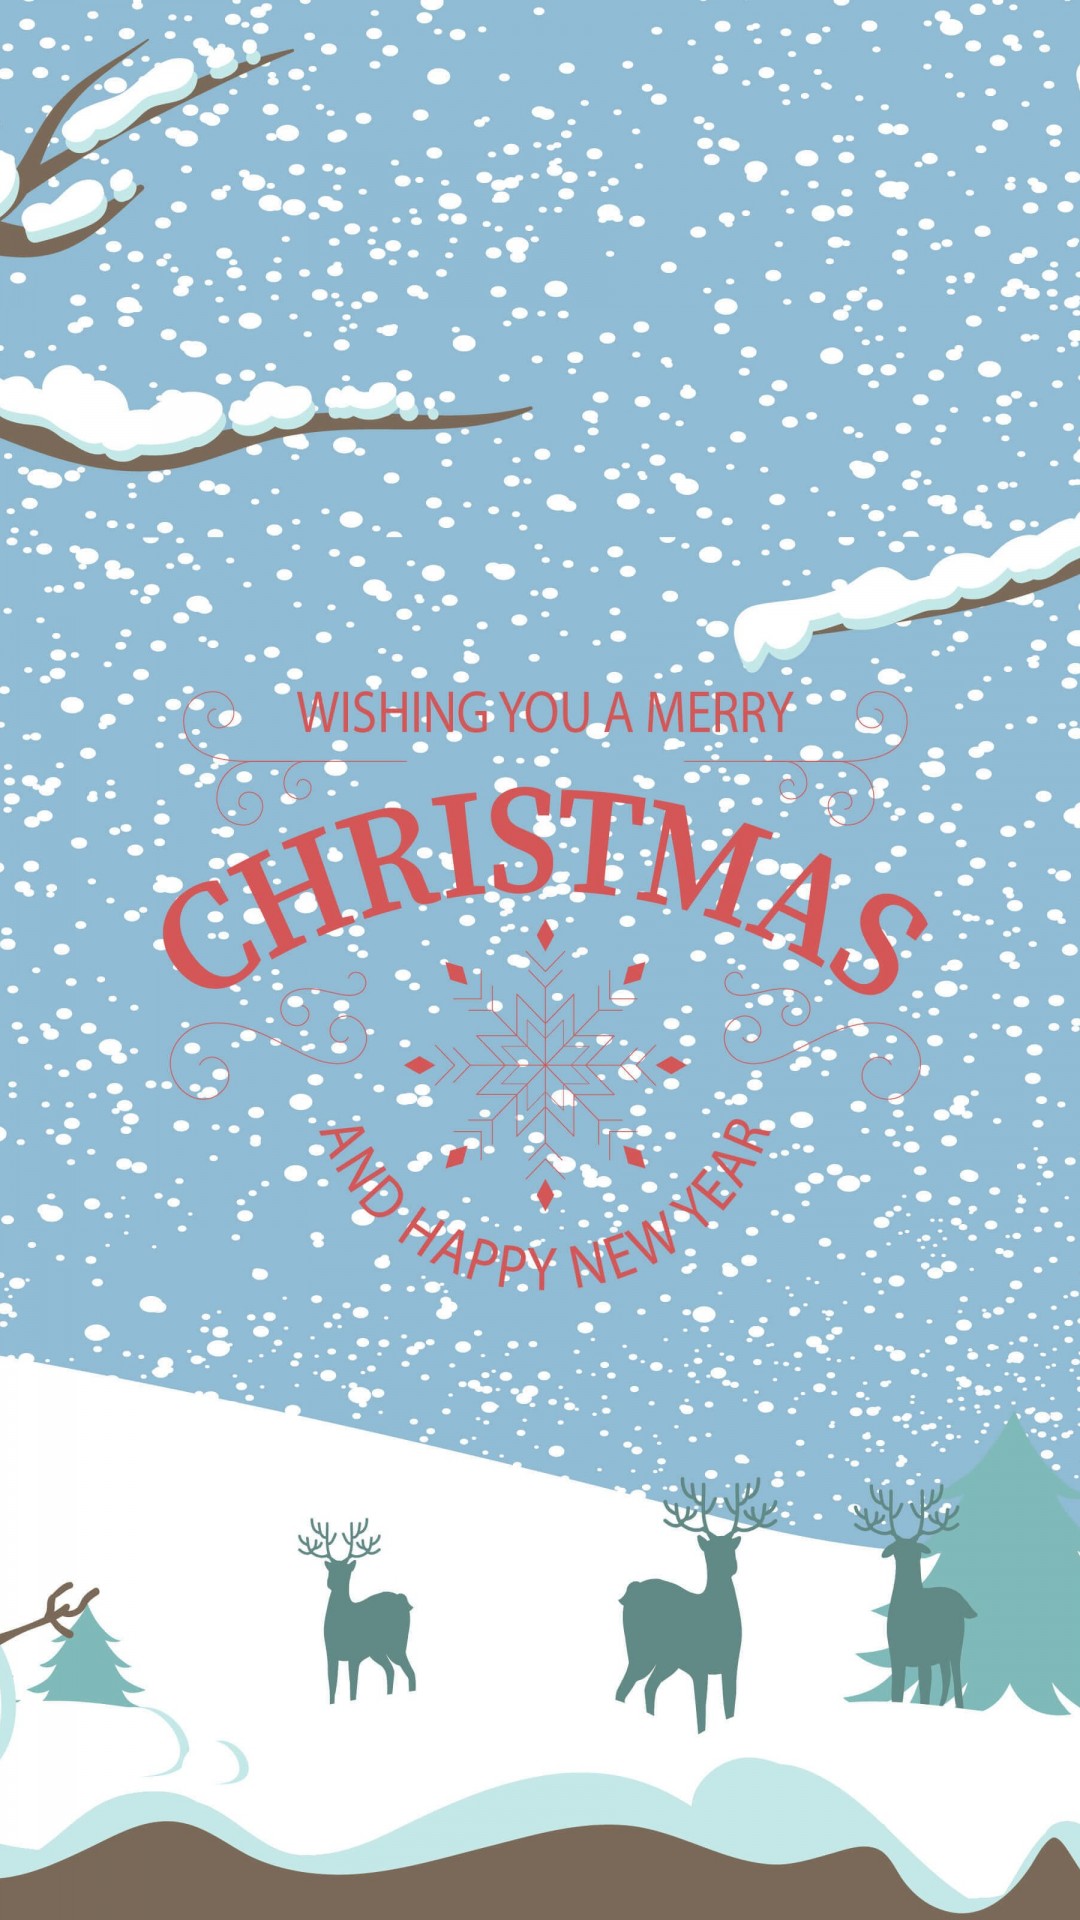 Merry Christmas Illustration Wallpaper for SAMSUNG Galaxy S5